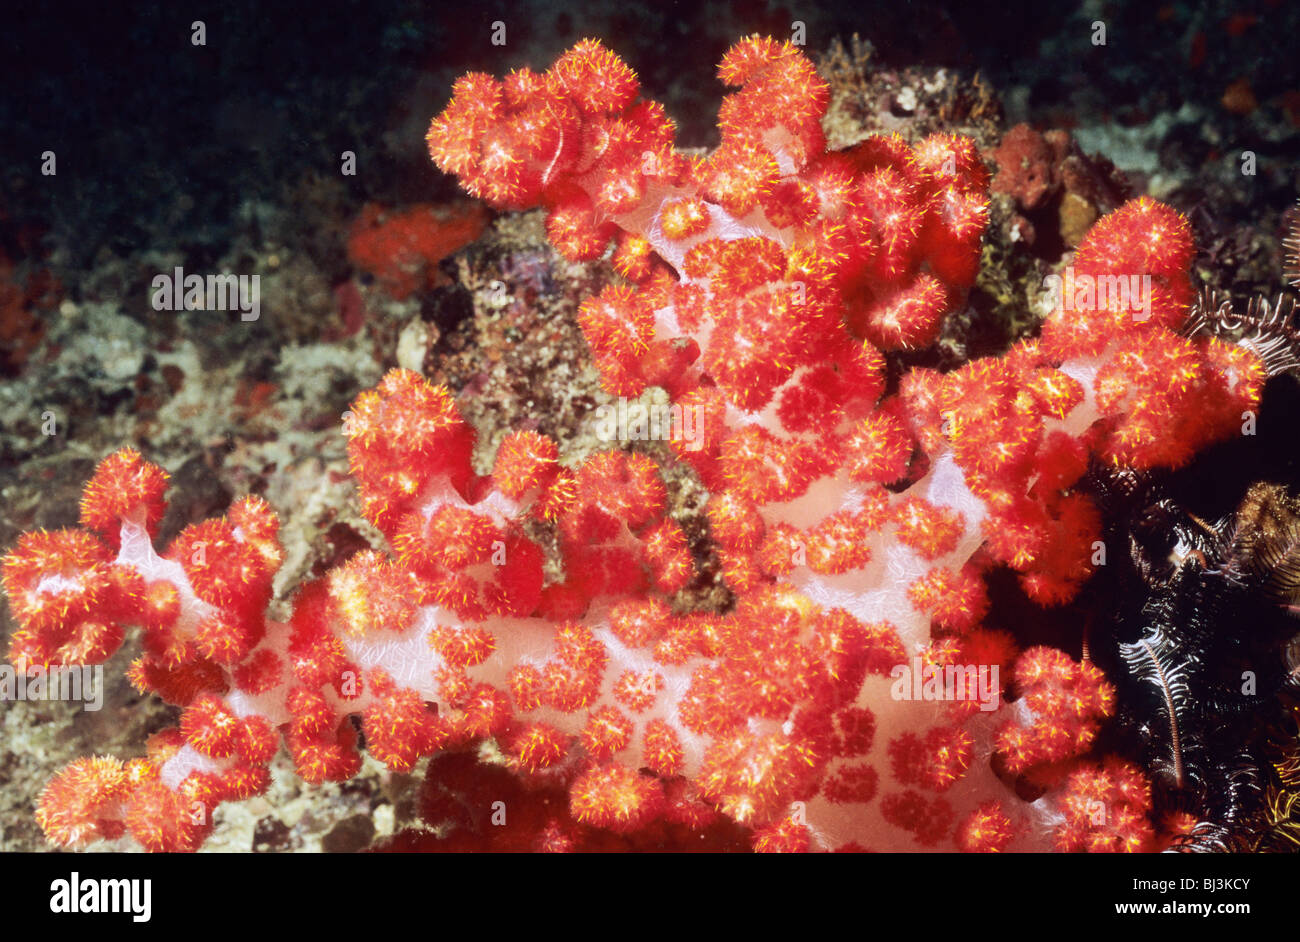 Coral. Spiky soft coral. Dendronephthya sp., underwater in the Flores Sea. Komodo National Park. Underwater photography. Stock Photo